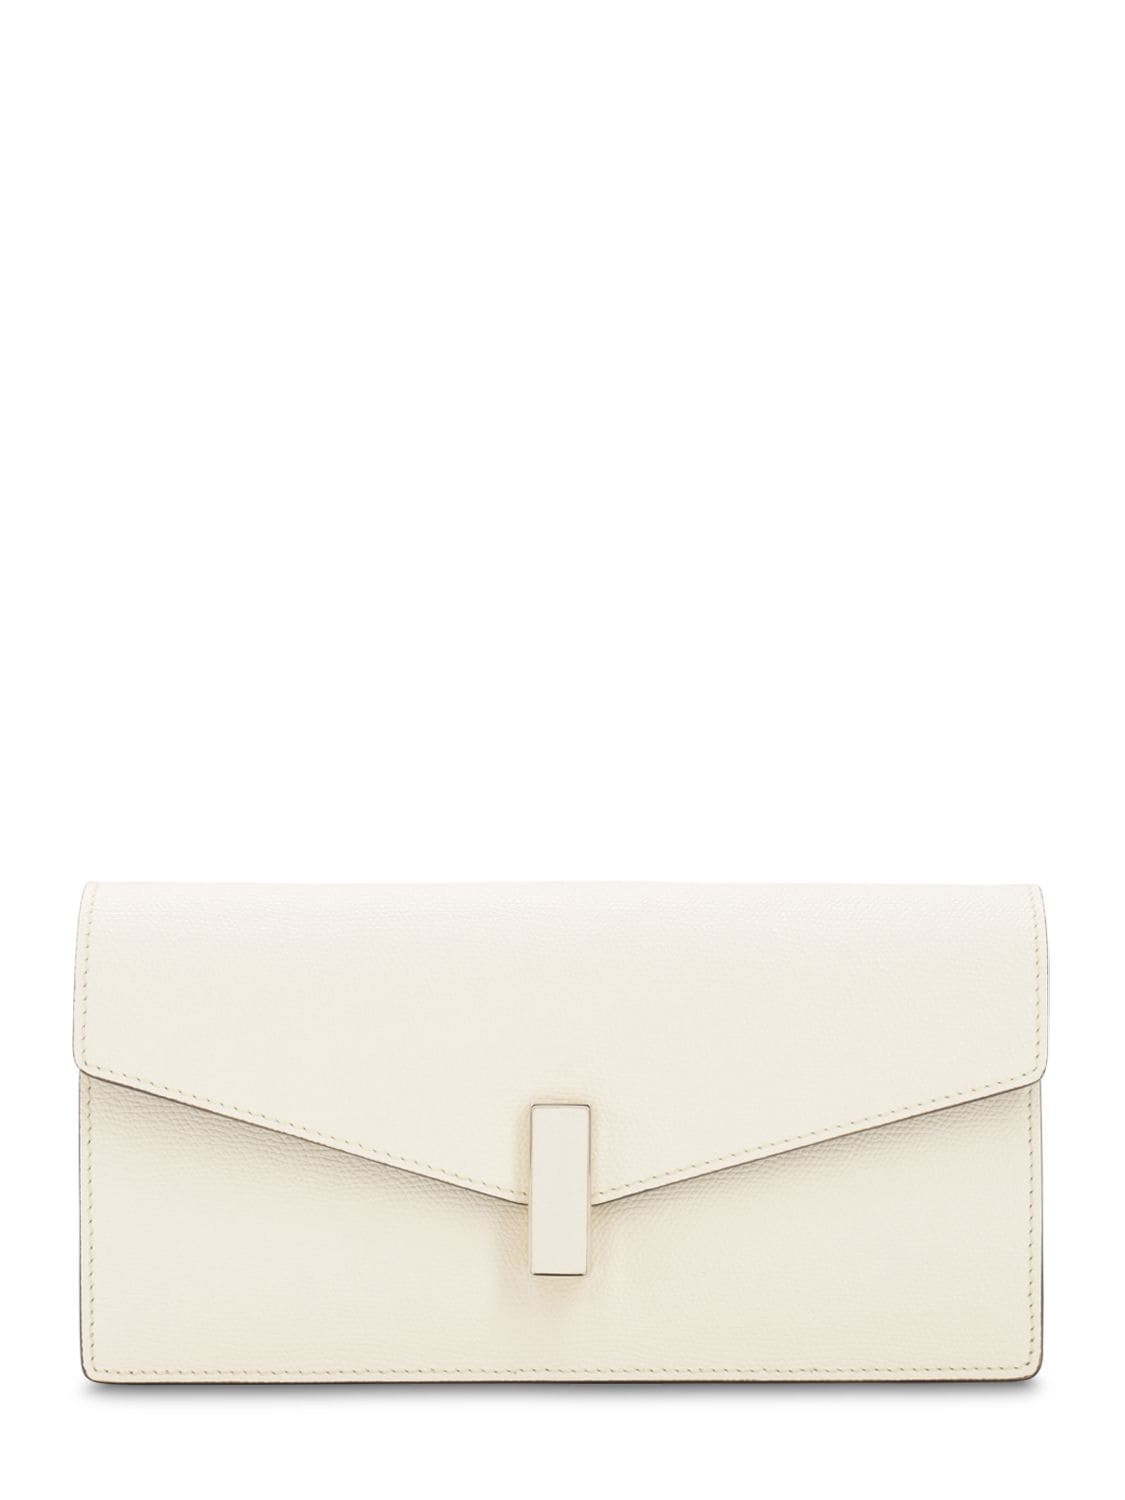 Valextra Iside Grained Leather Clutch In Pergamena